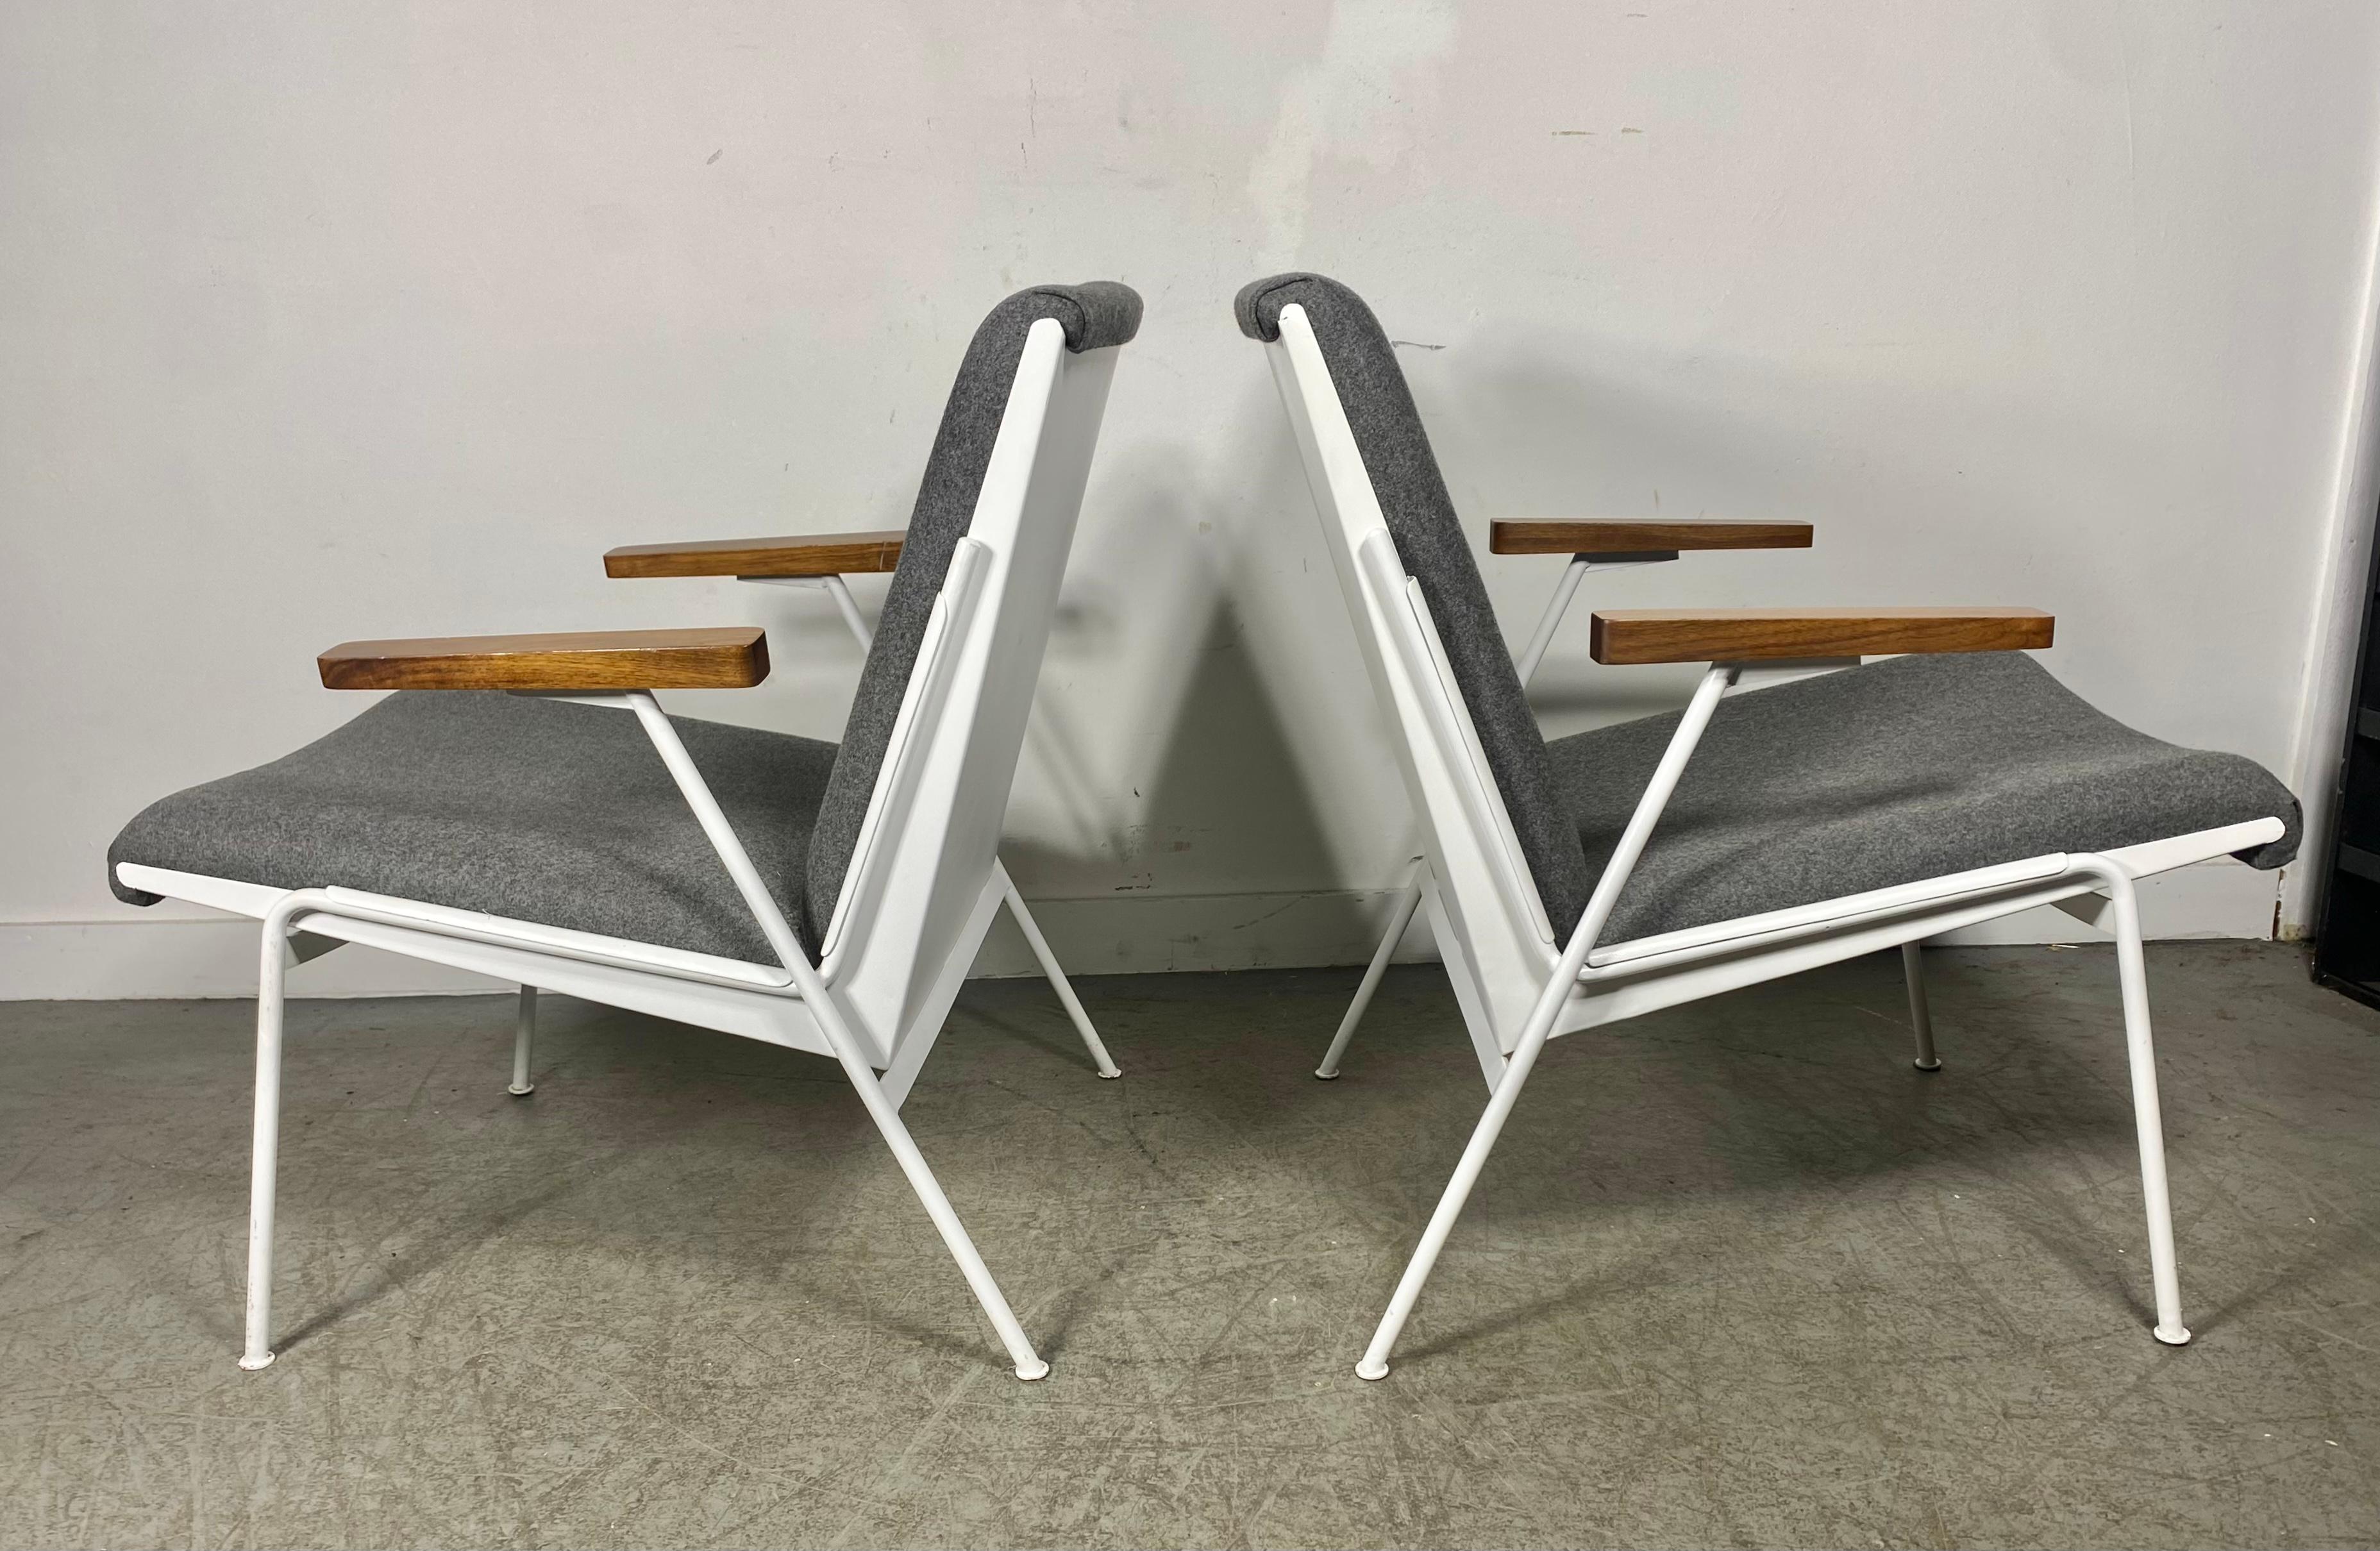 The Oase lounge chair was designed by Wim Rietveld for Ahrend de Cirkel in 1958, and gained the Signe d'Or price in 1959. A beautiful piece of Dutch design! Restored in a wonderful grey wool fabric,, powder-coat white,, stunning contrast.. Extremely